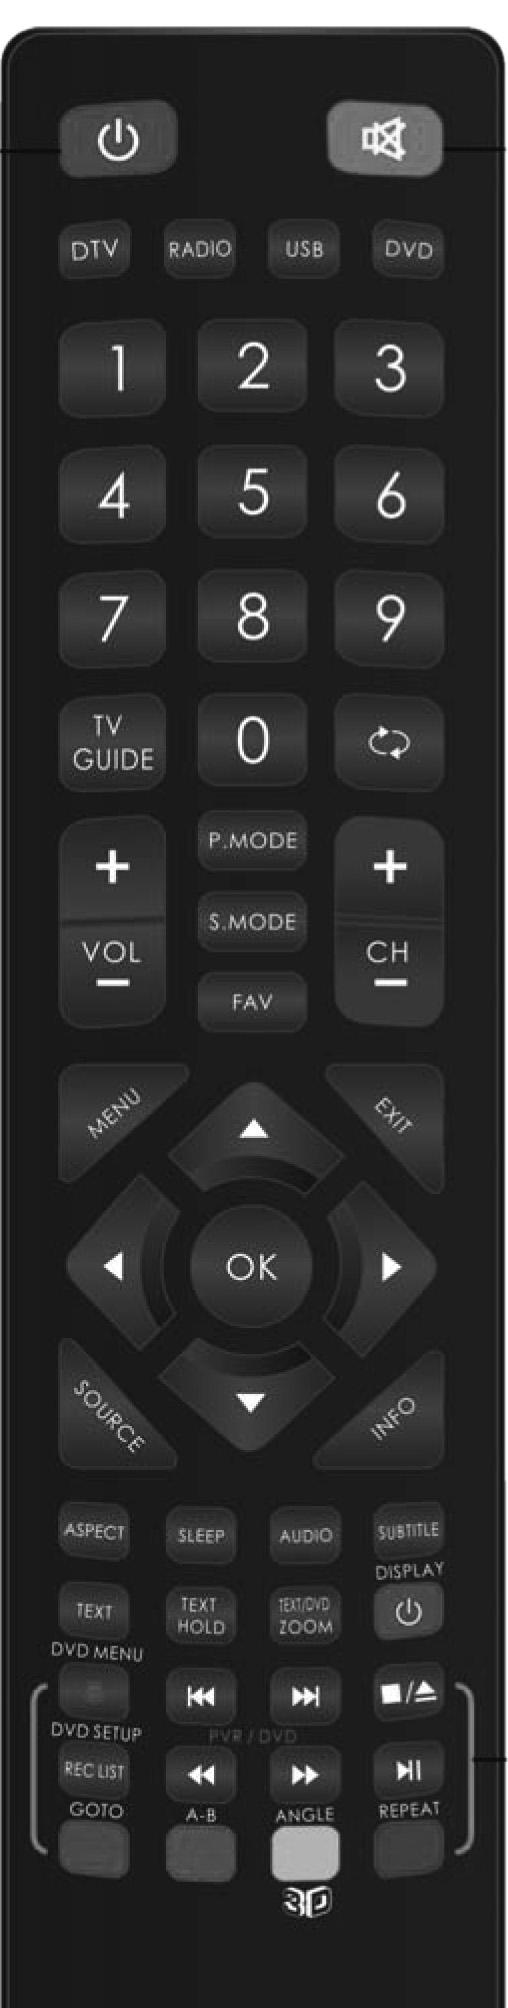 Remote control REMOTE CONTROL Key 1 2 For models with integrated DVD players. For models with PVR Function. For models with USB Playback. STANDBY - Switch on TV when in standby or vice versa.